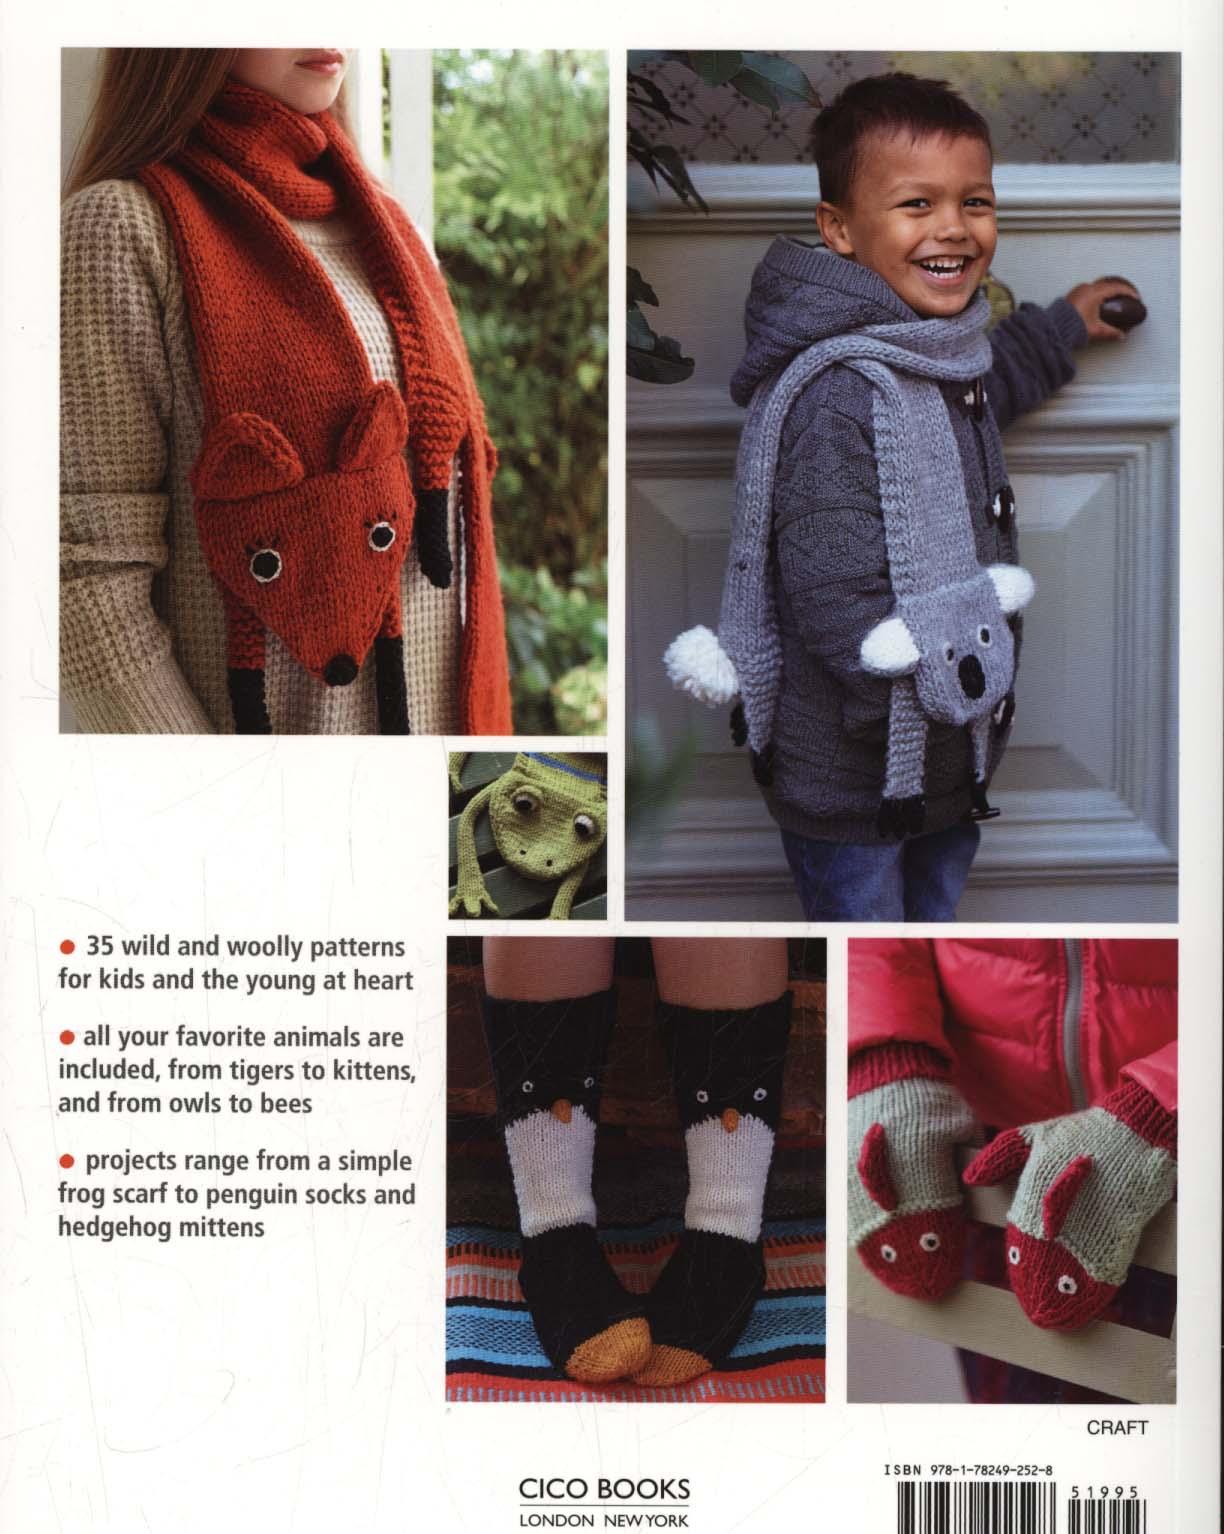 Knitted Animal Scarves, Mitts, and Socks